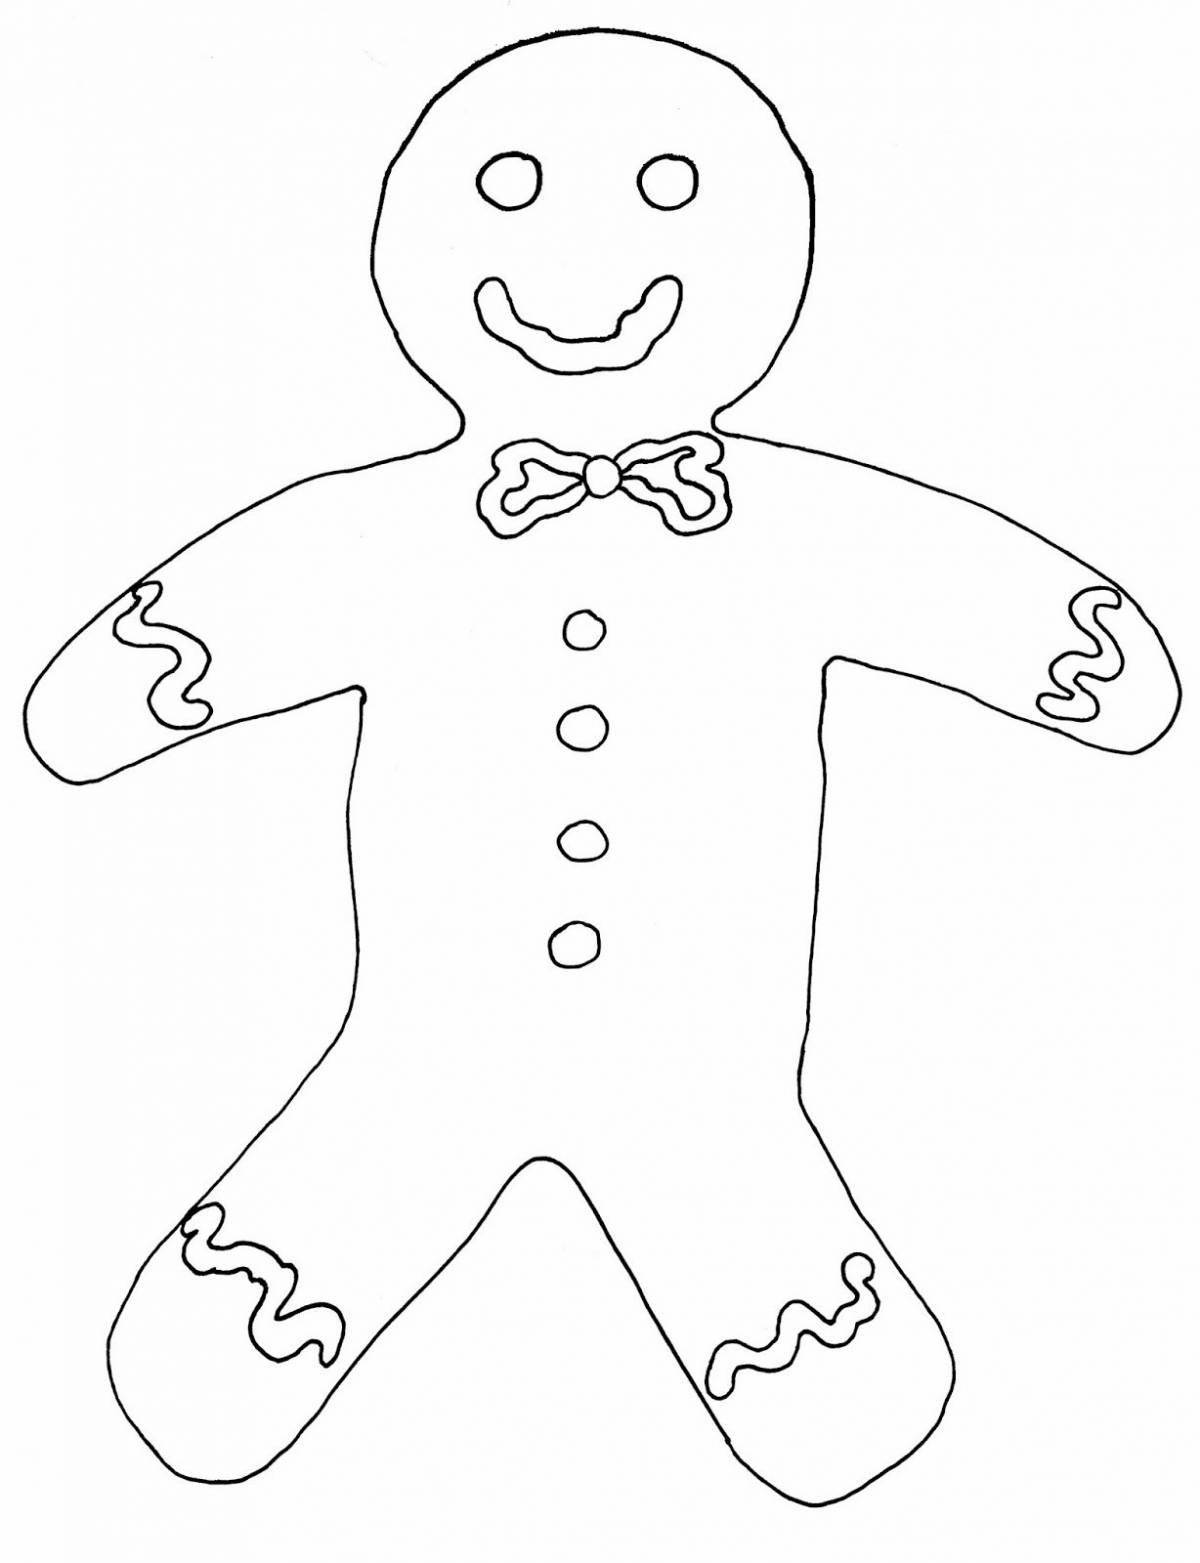 Adorable Shrek Cookie Coloring Page